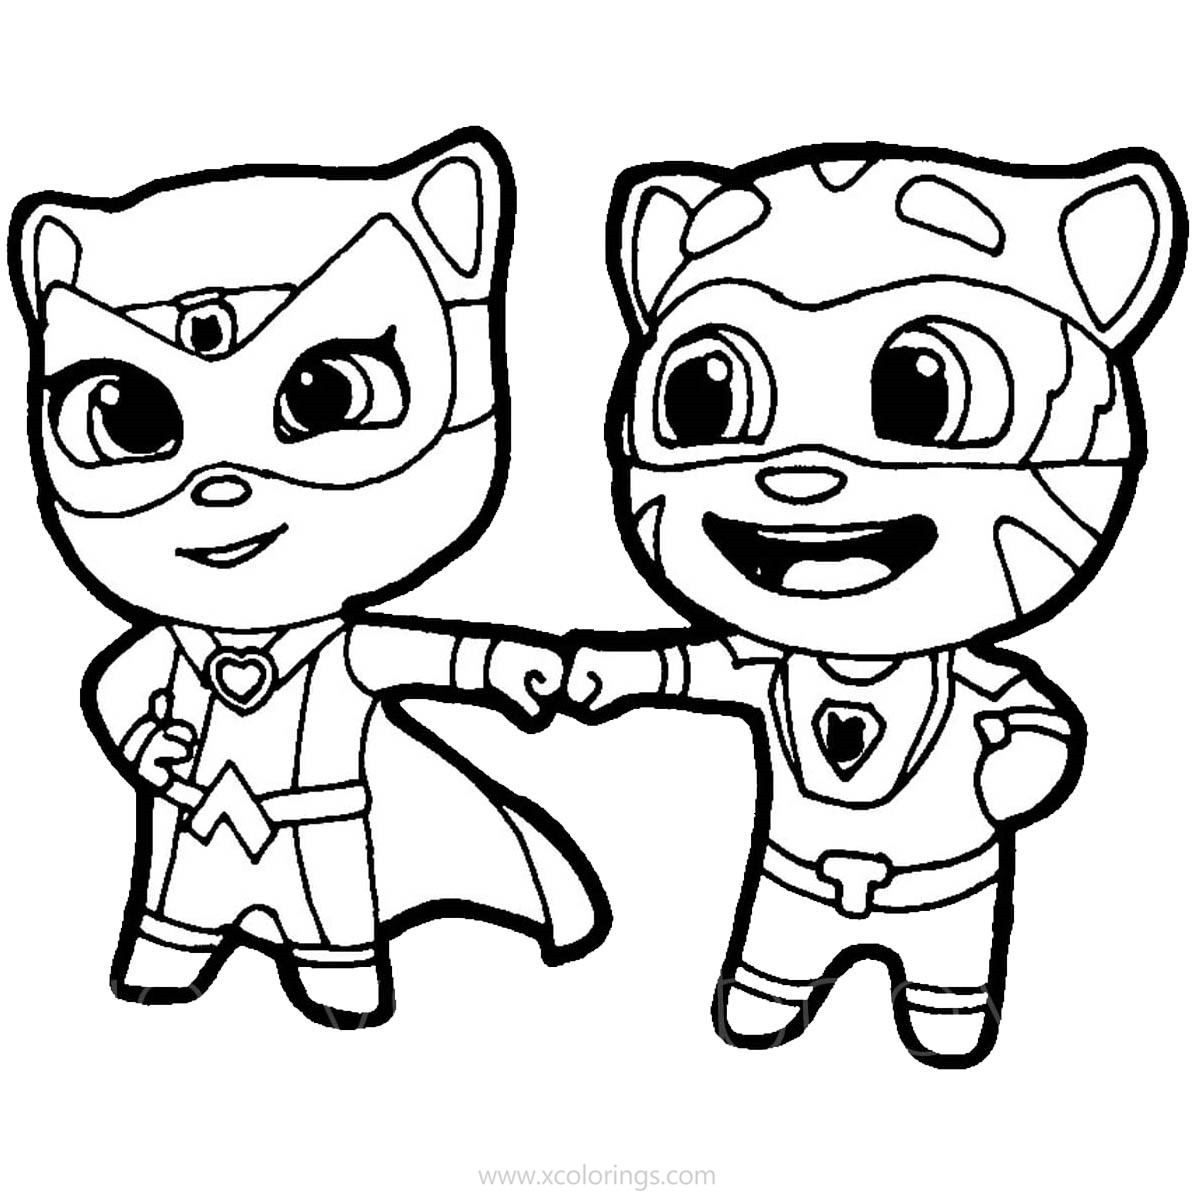 Talking Tom Heroes 1 Coloring Page Free Printable Coloring Pages For